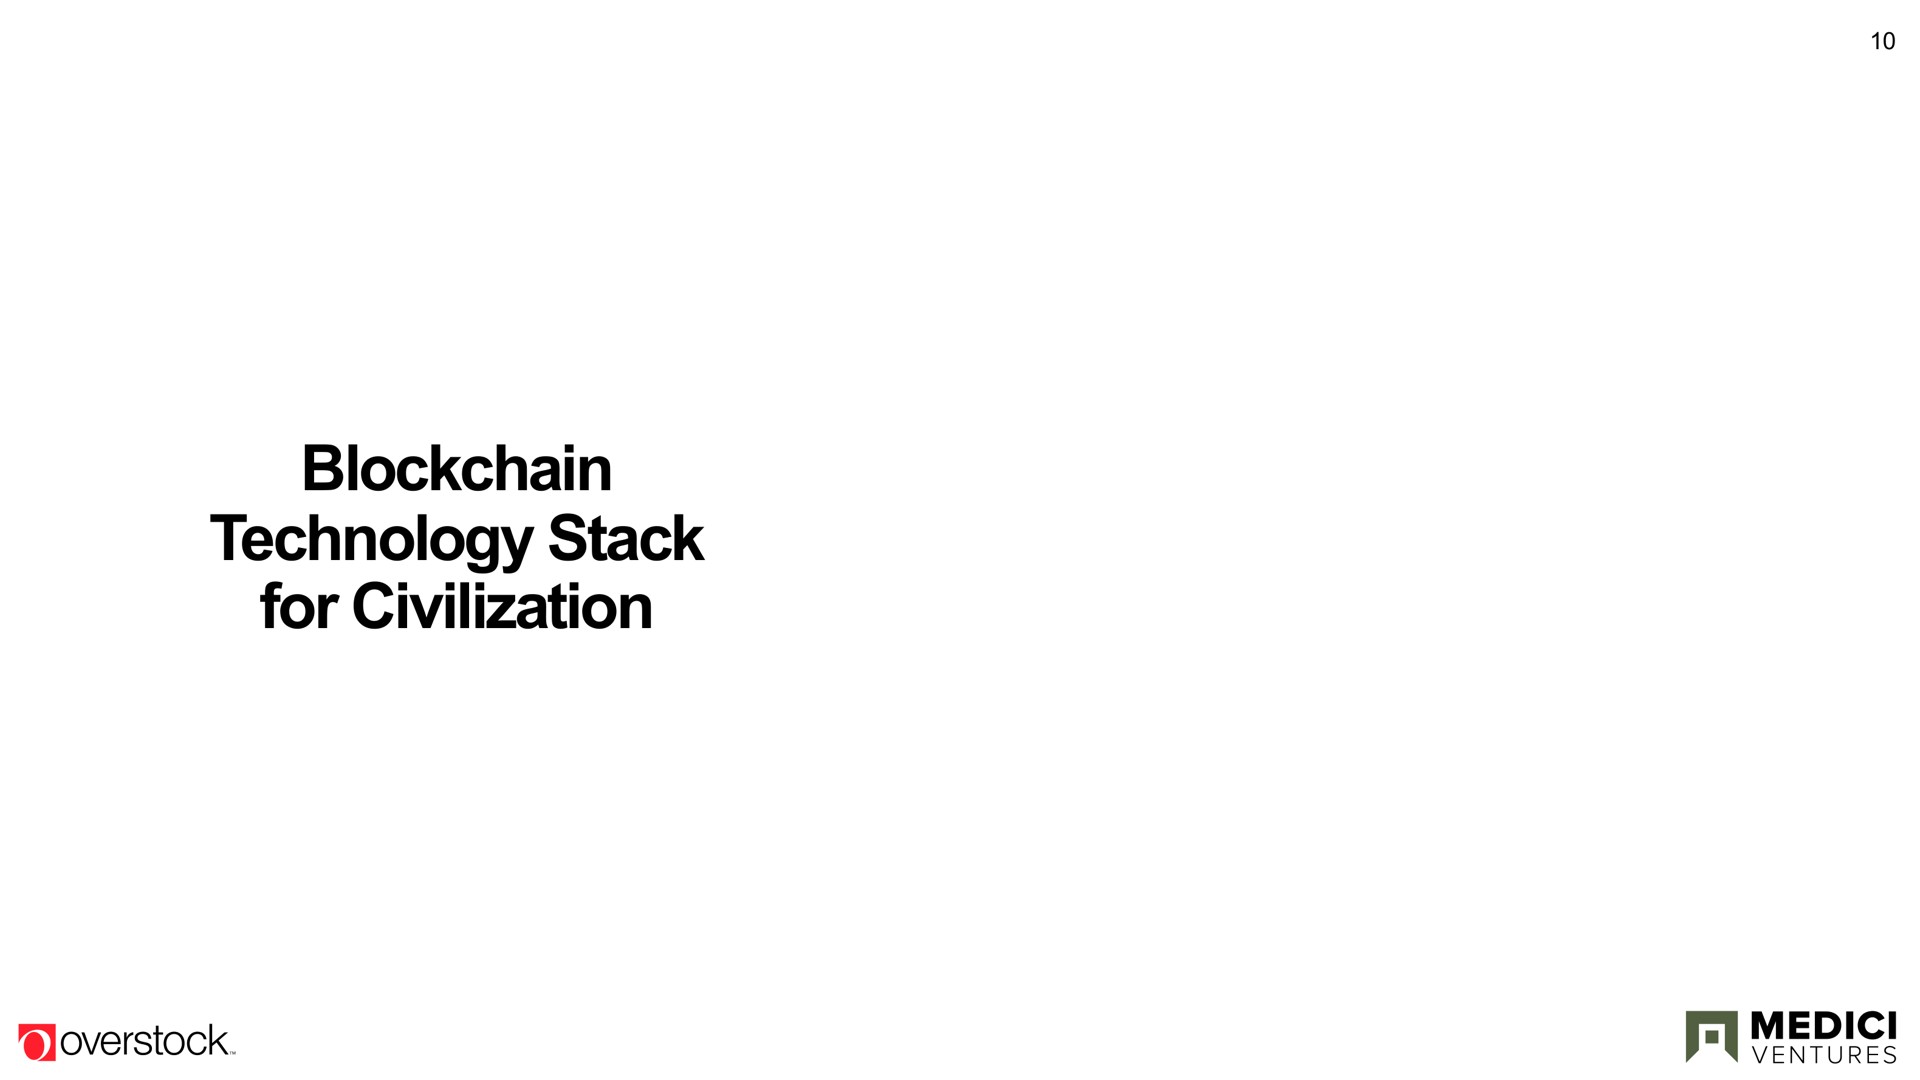 technology stack for civilization | Overstock